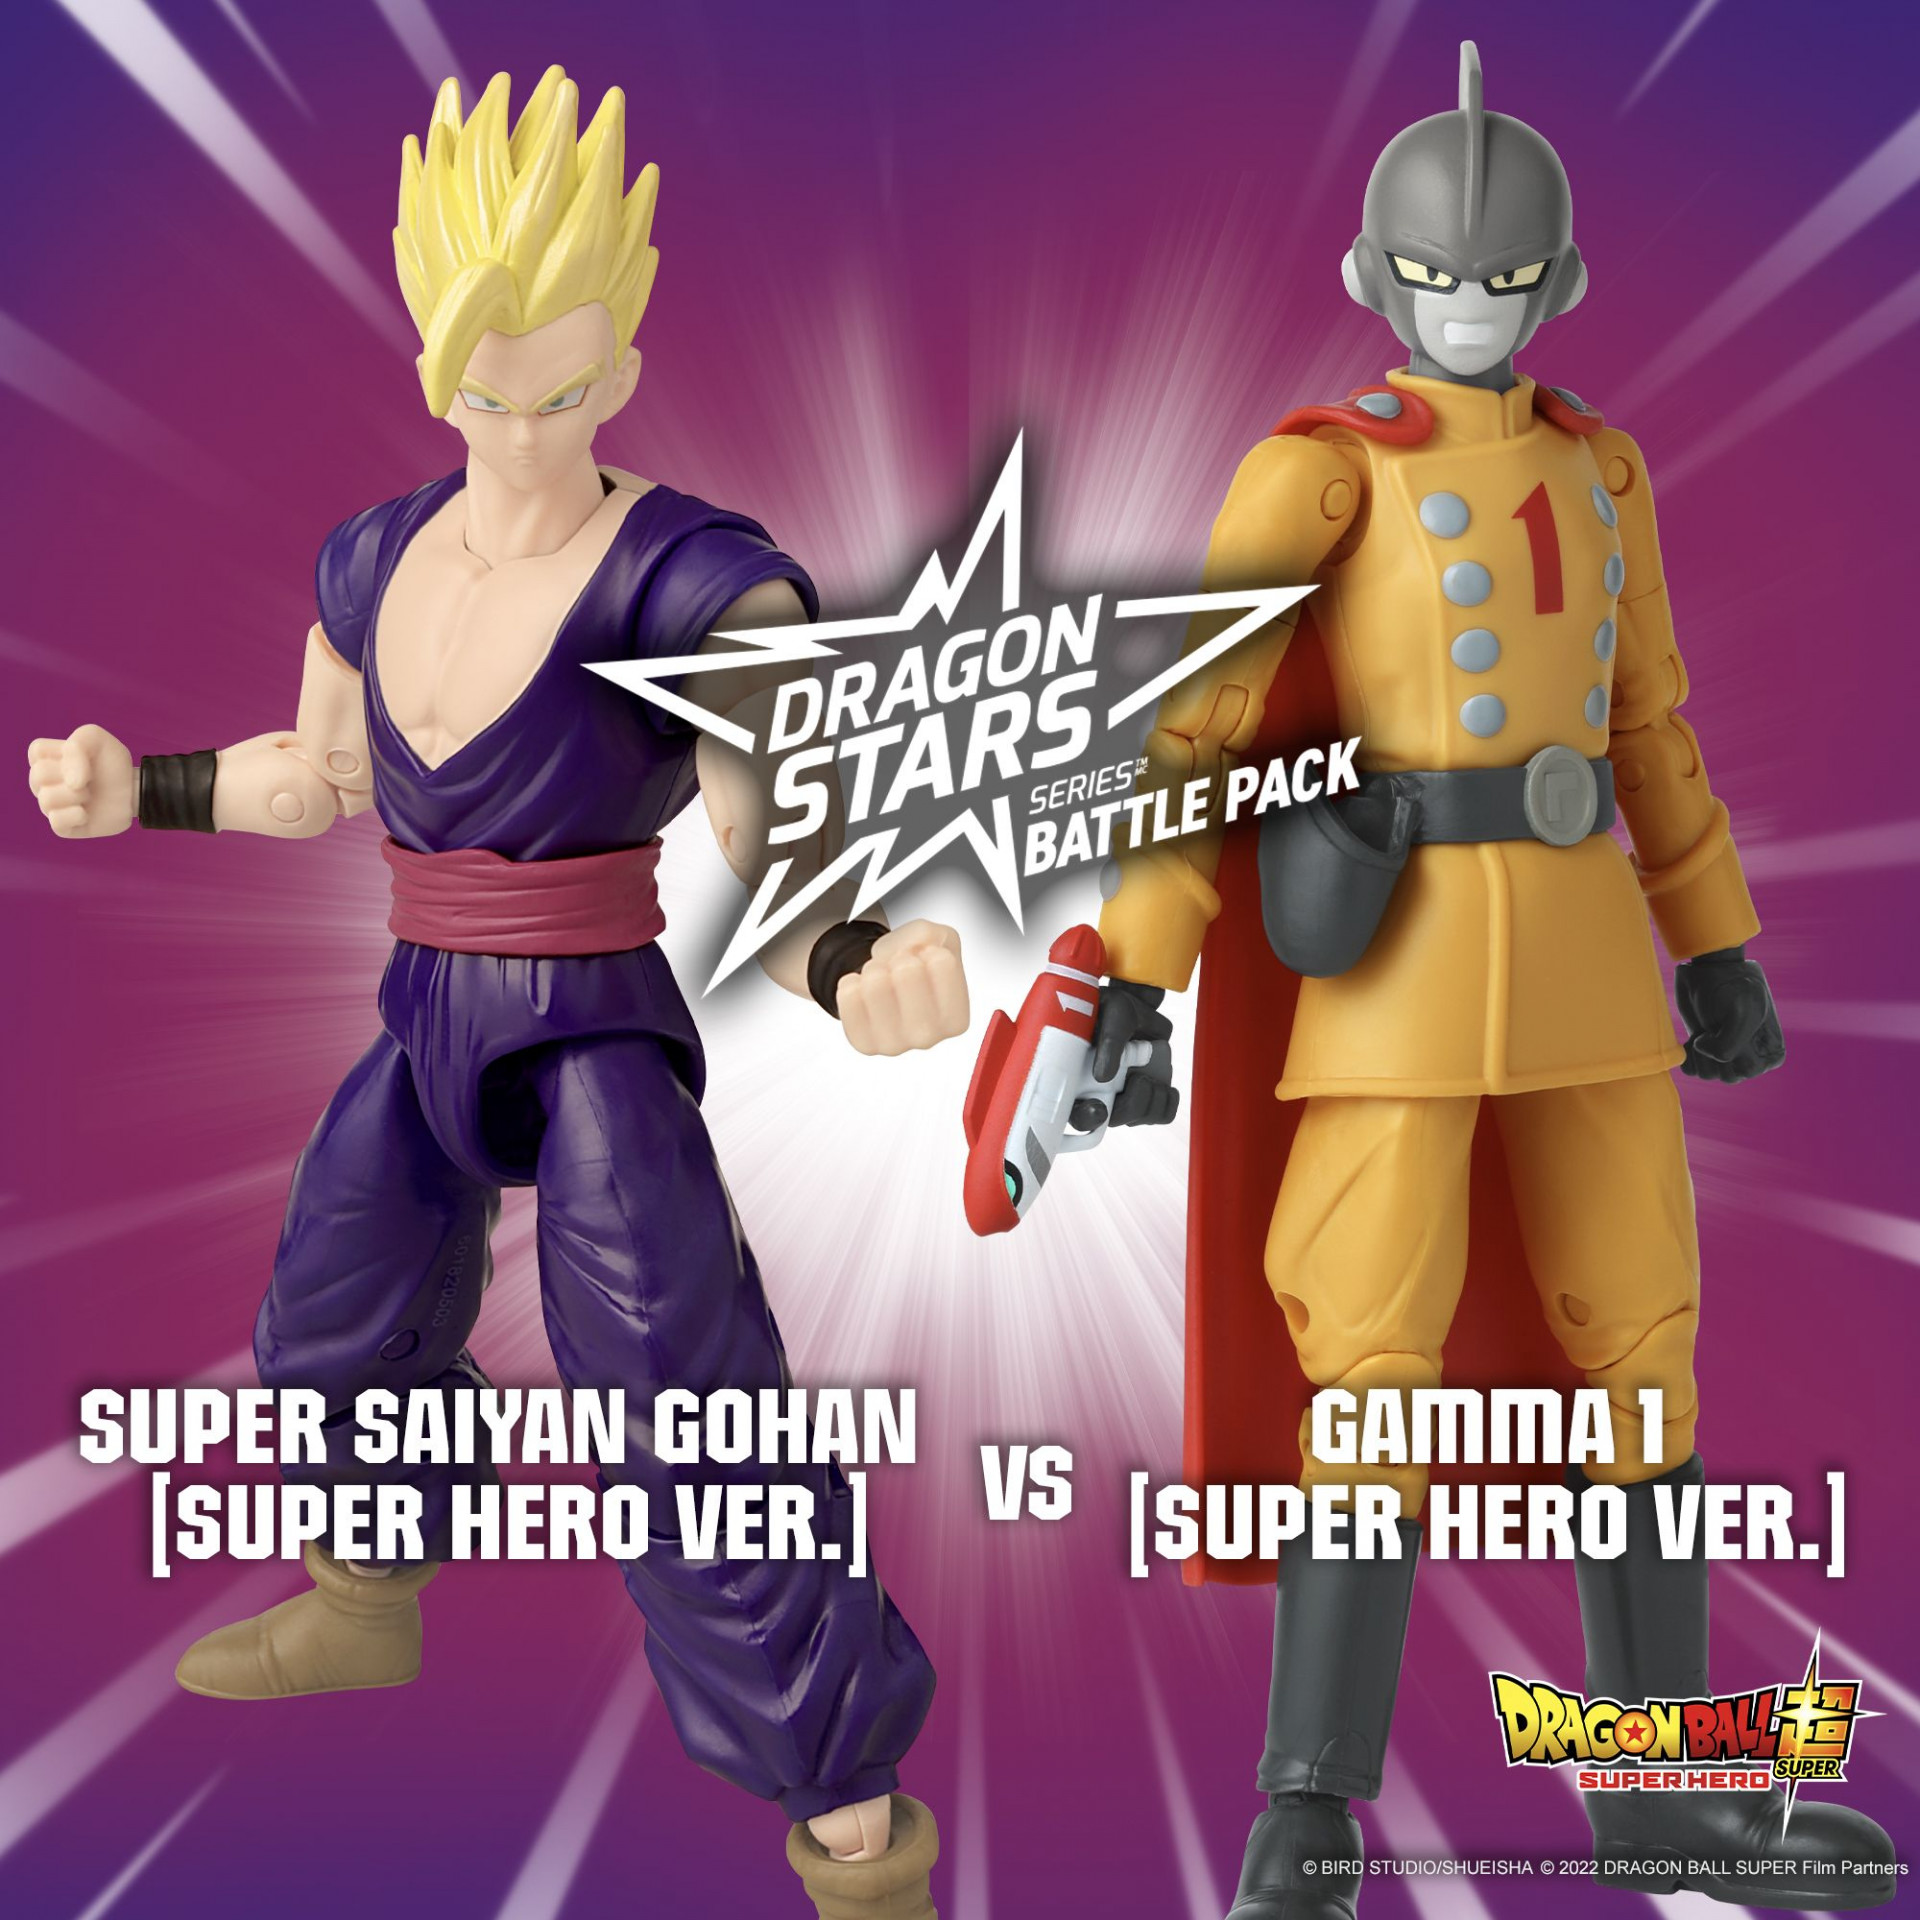 Two-Figure Set Featuring Super Saiyan Gohan and Gamma 1 From Dragon Ball Super: SUPER HERO Coming to the Dragon Stars Series Battle Pack Line!